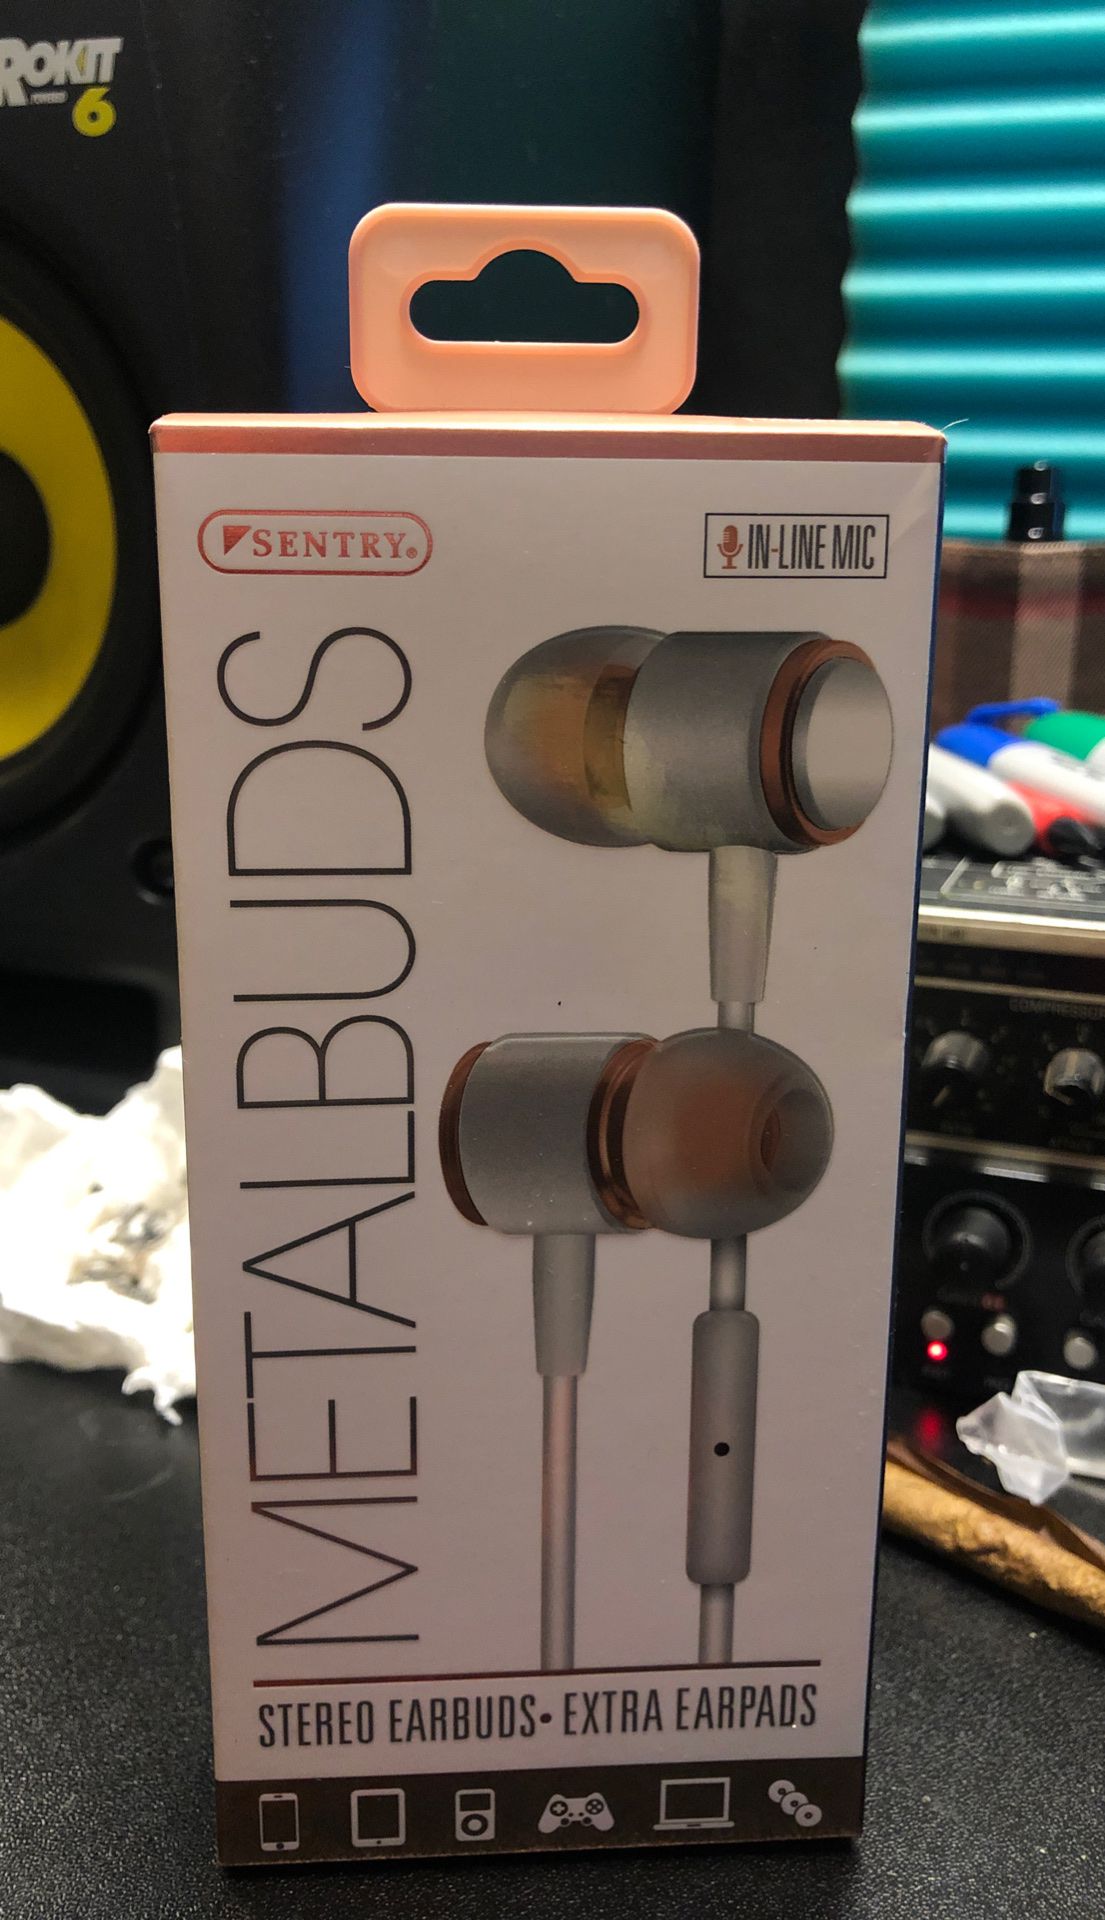 Sentry metal earbuds with mic